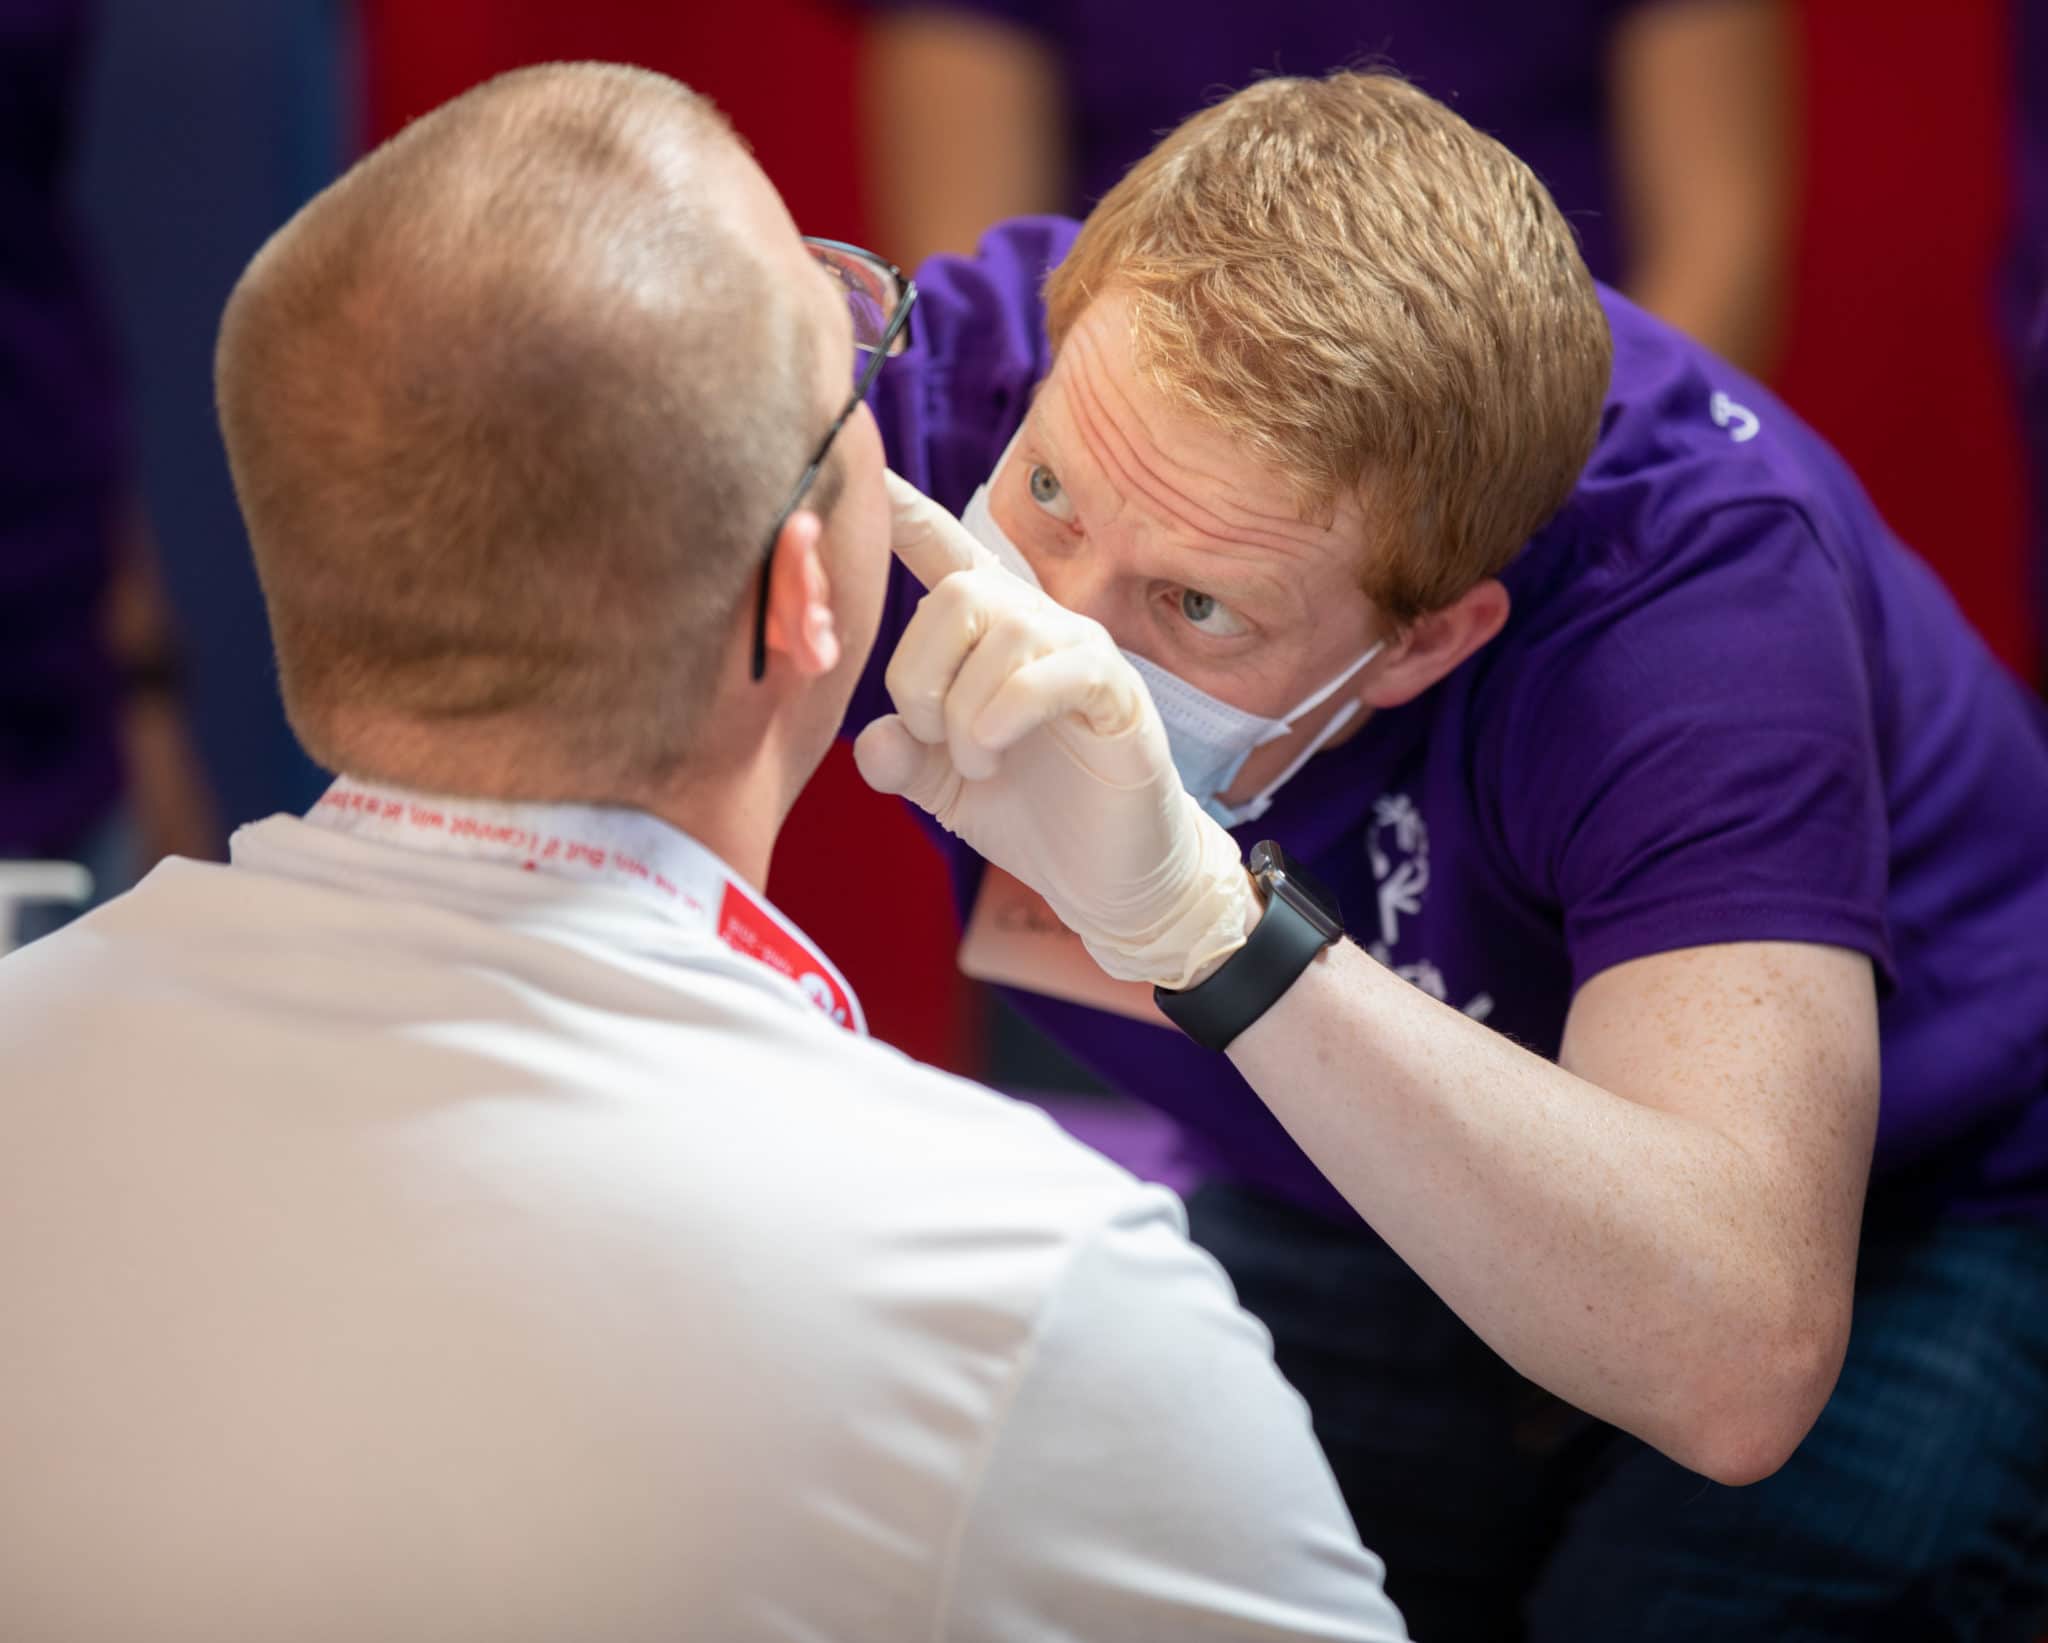 A dental volunteer bends over to look inside the mouth of an athlete